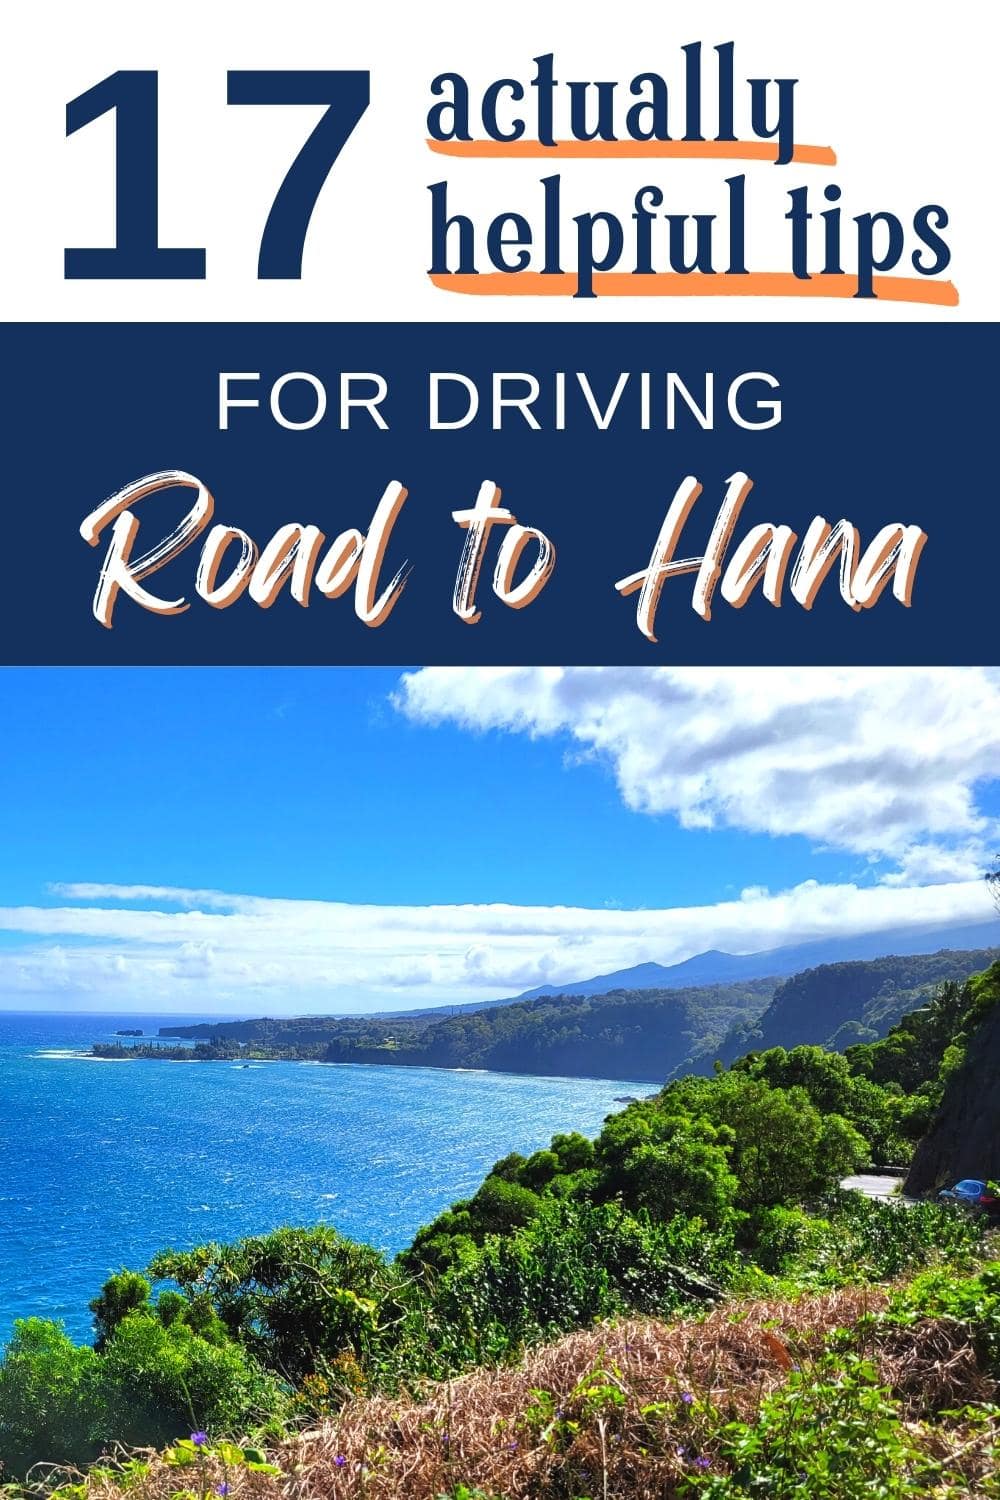 17 Helpful Tips for Driving the Road to Hana in Maui